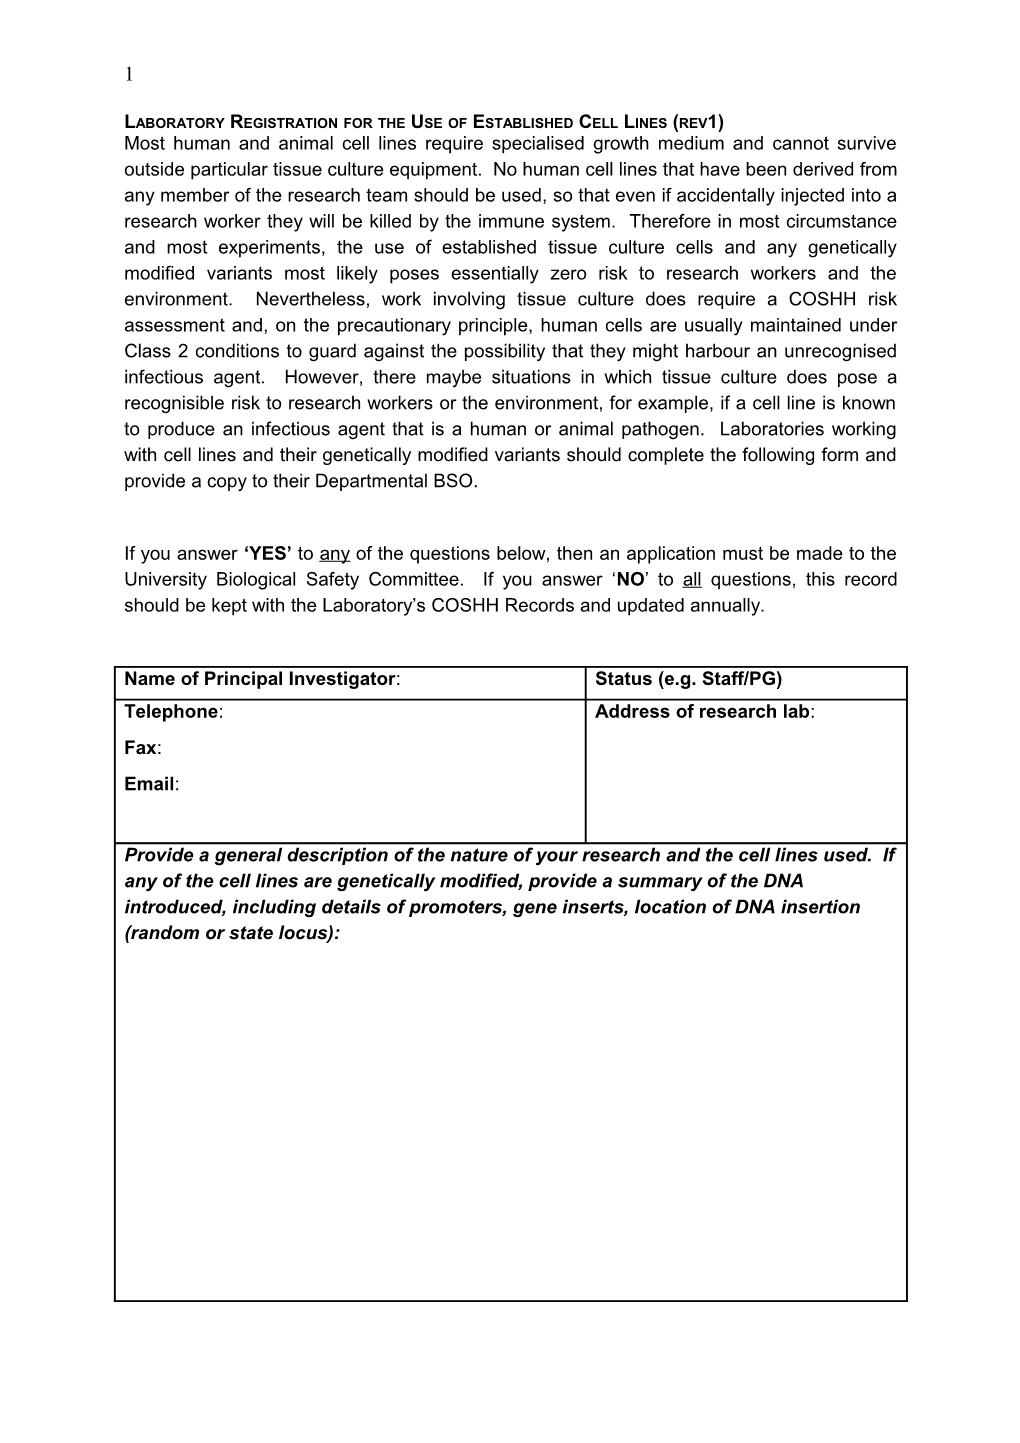 Risk Assessment Form for the Use of Transfected Cell Lines (Rev1)